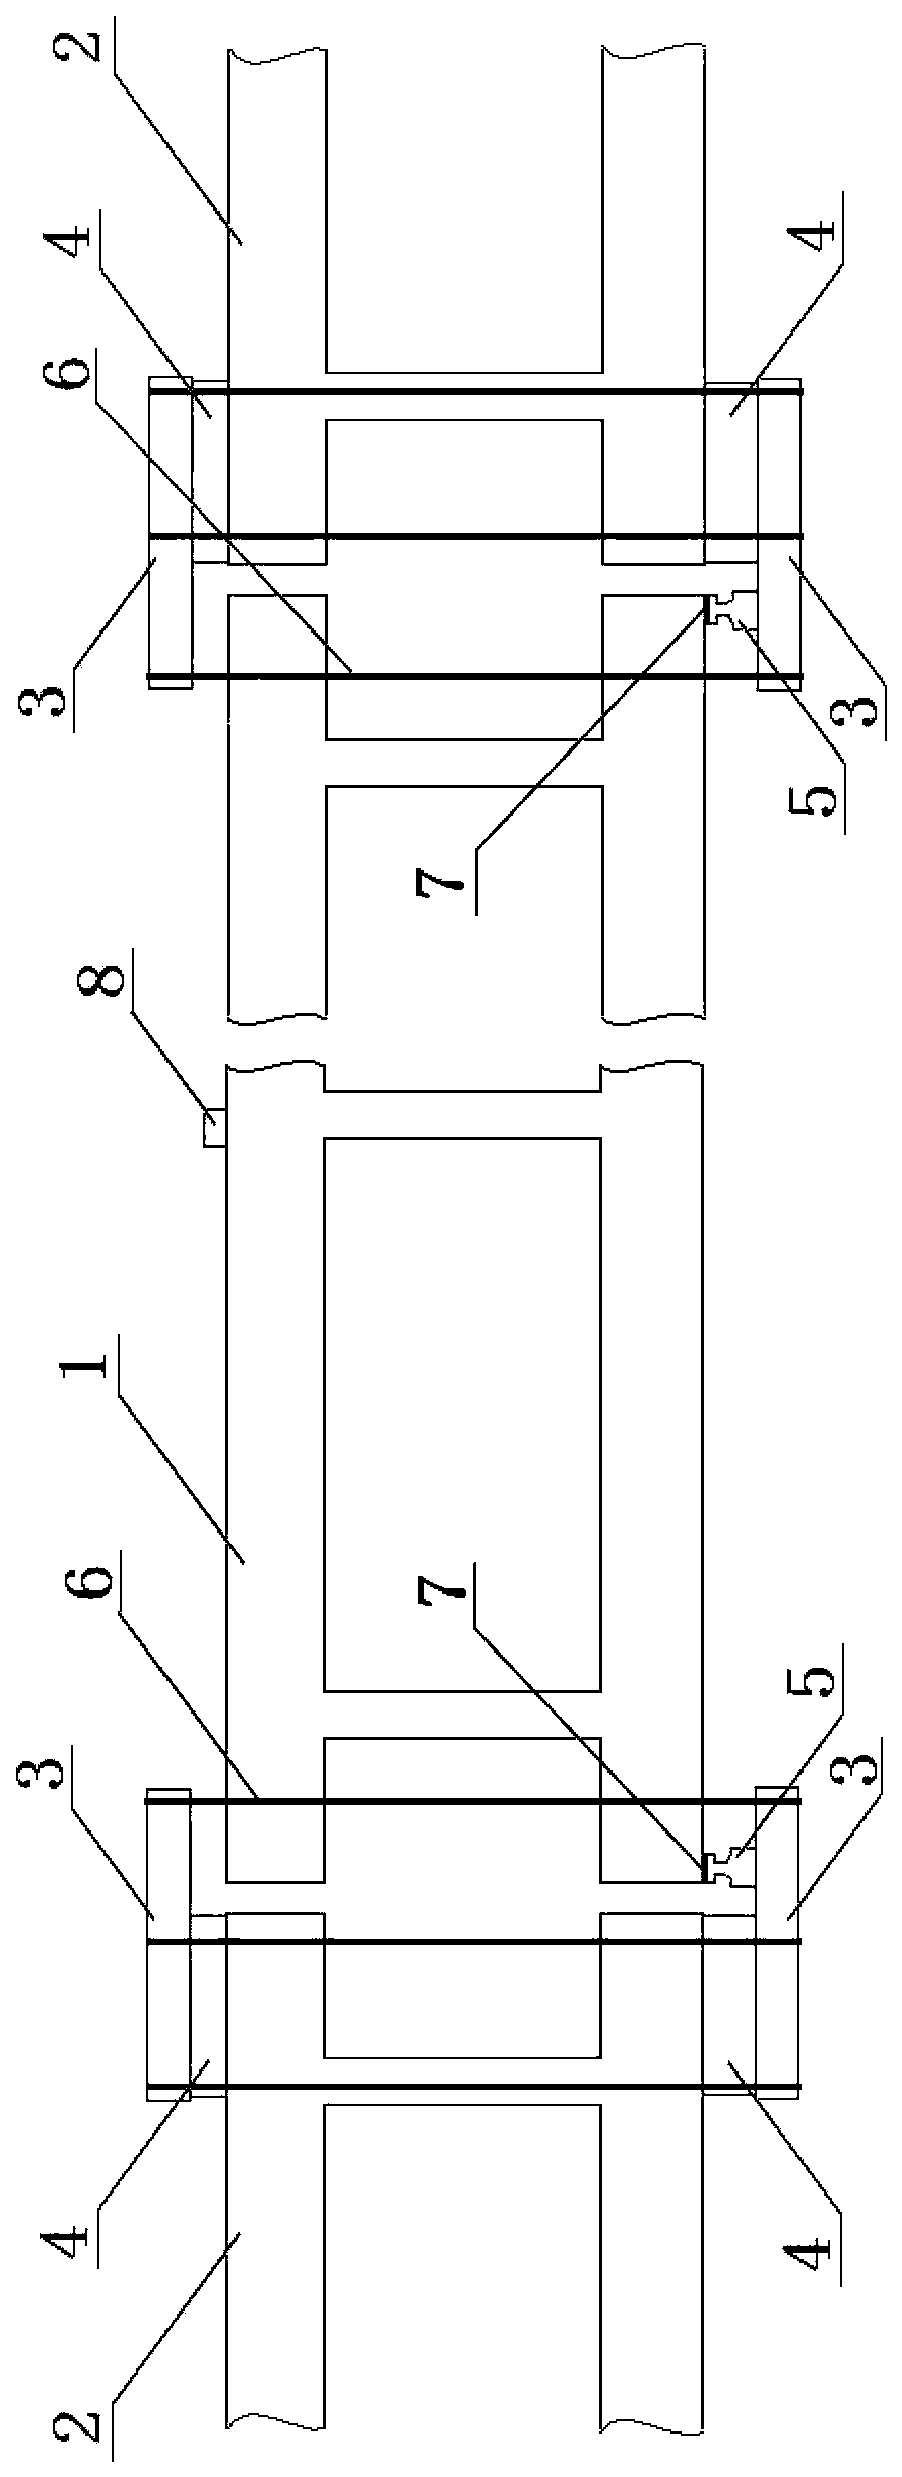 Ladder type track bed lateral resistance test system and test method